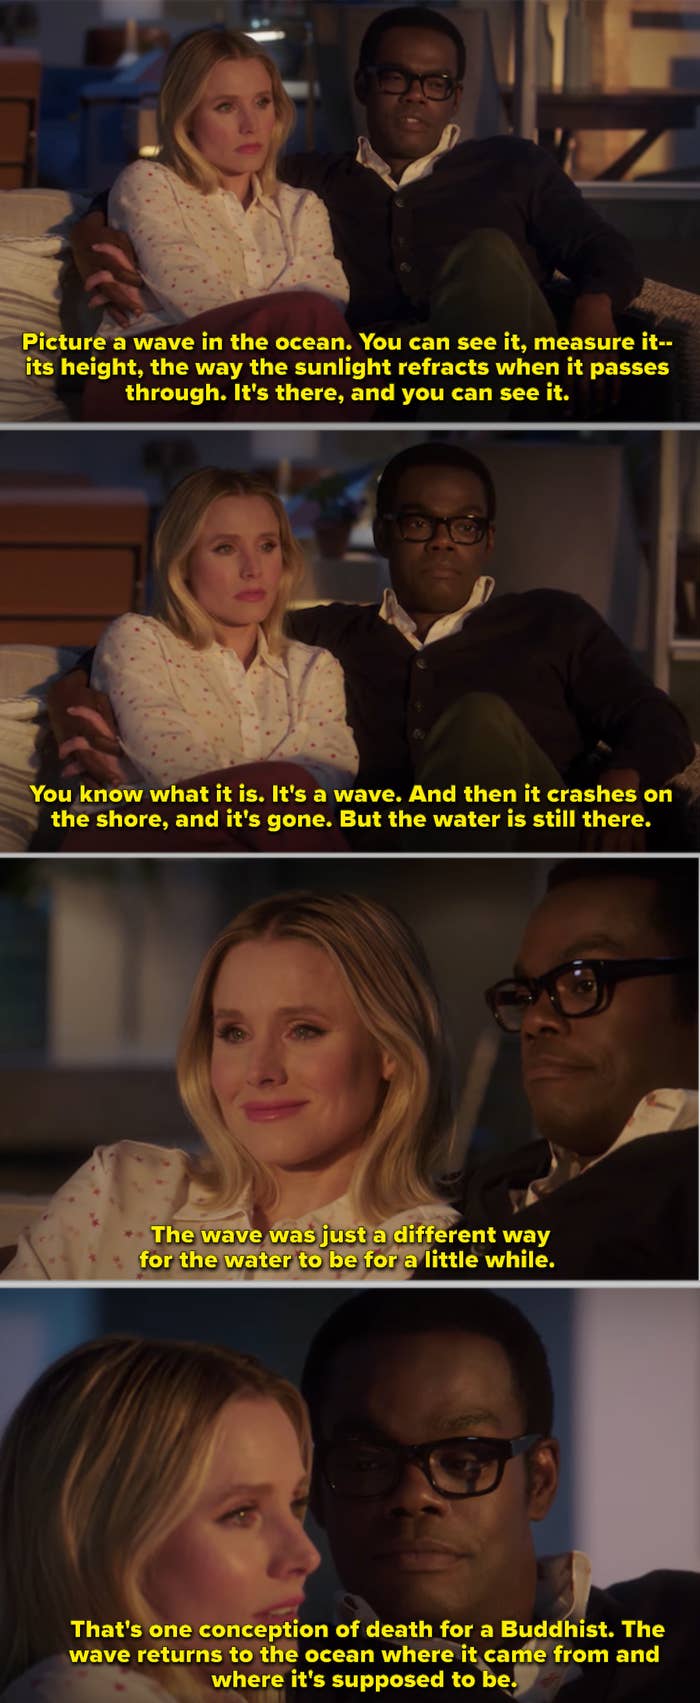 Chidi talks to Eleanor about death as they sit together and watch the sunset